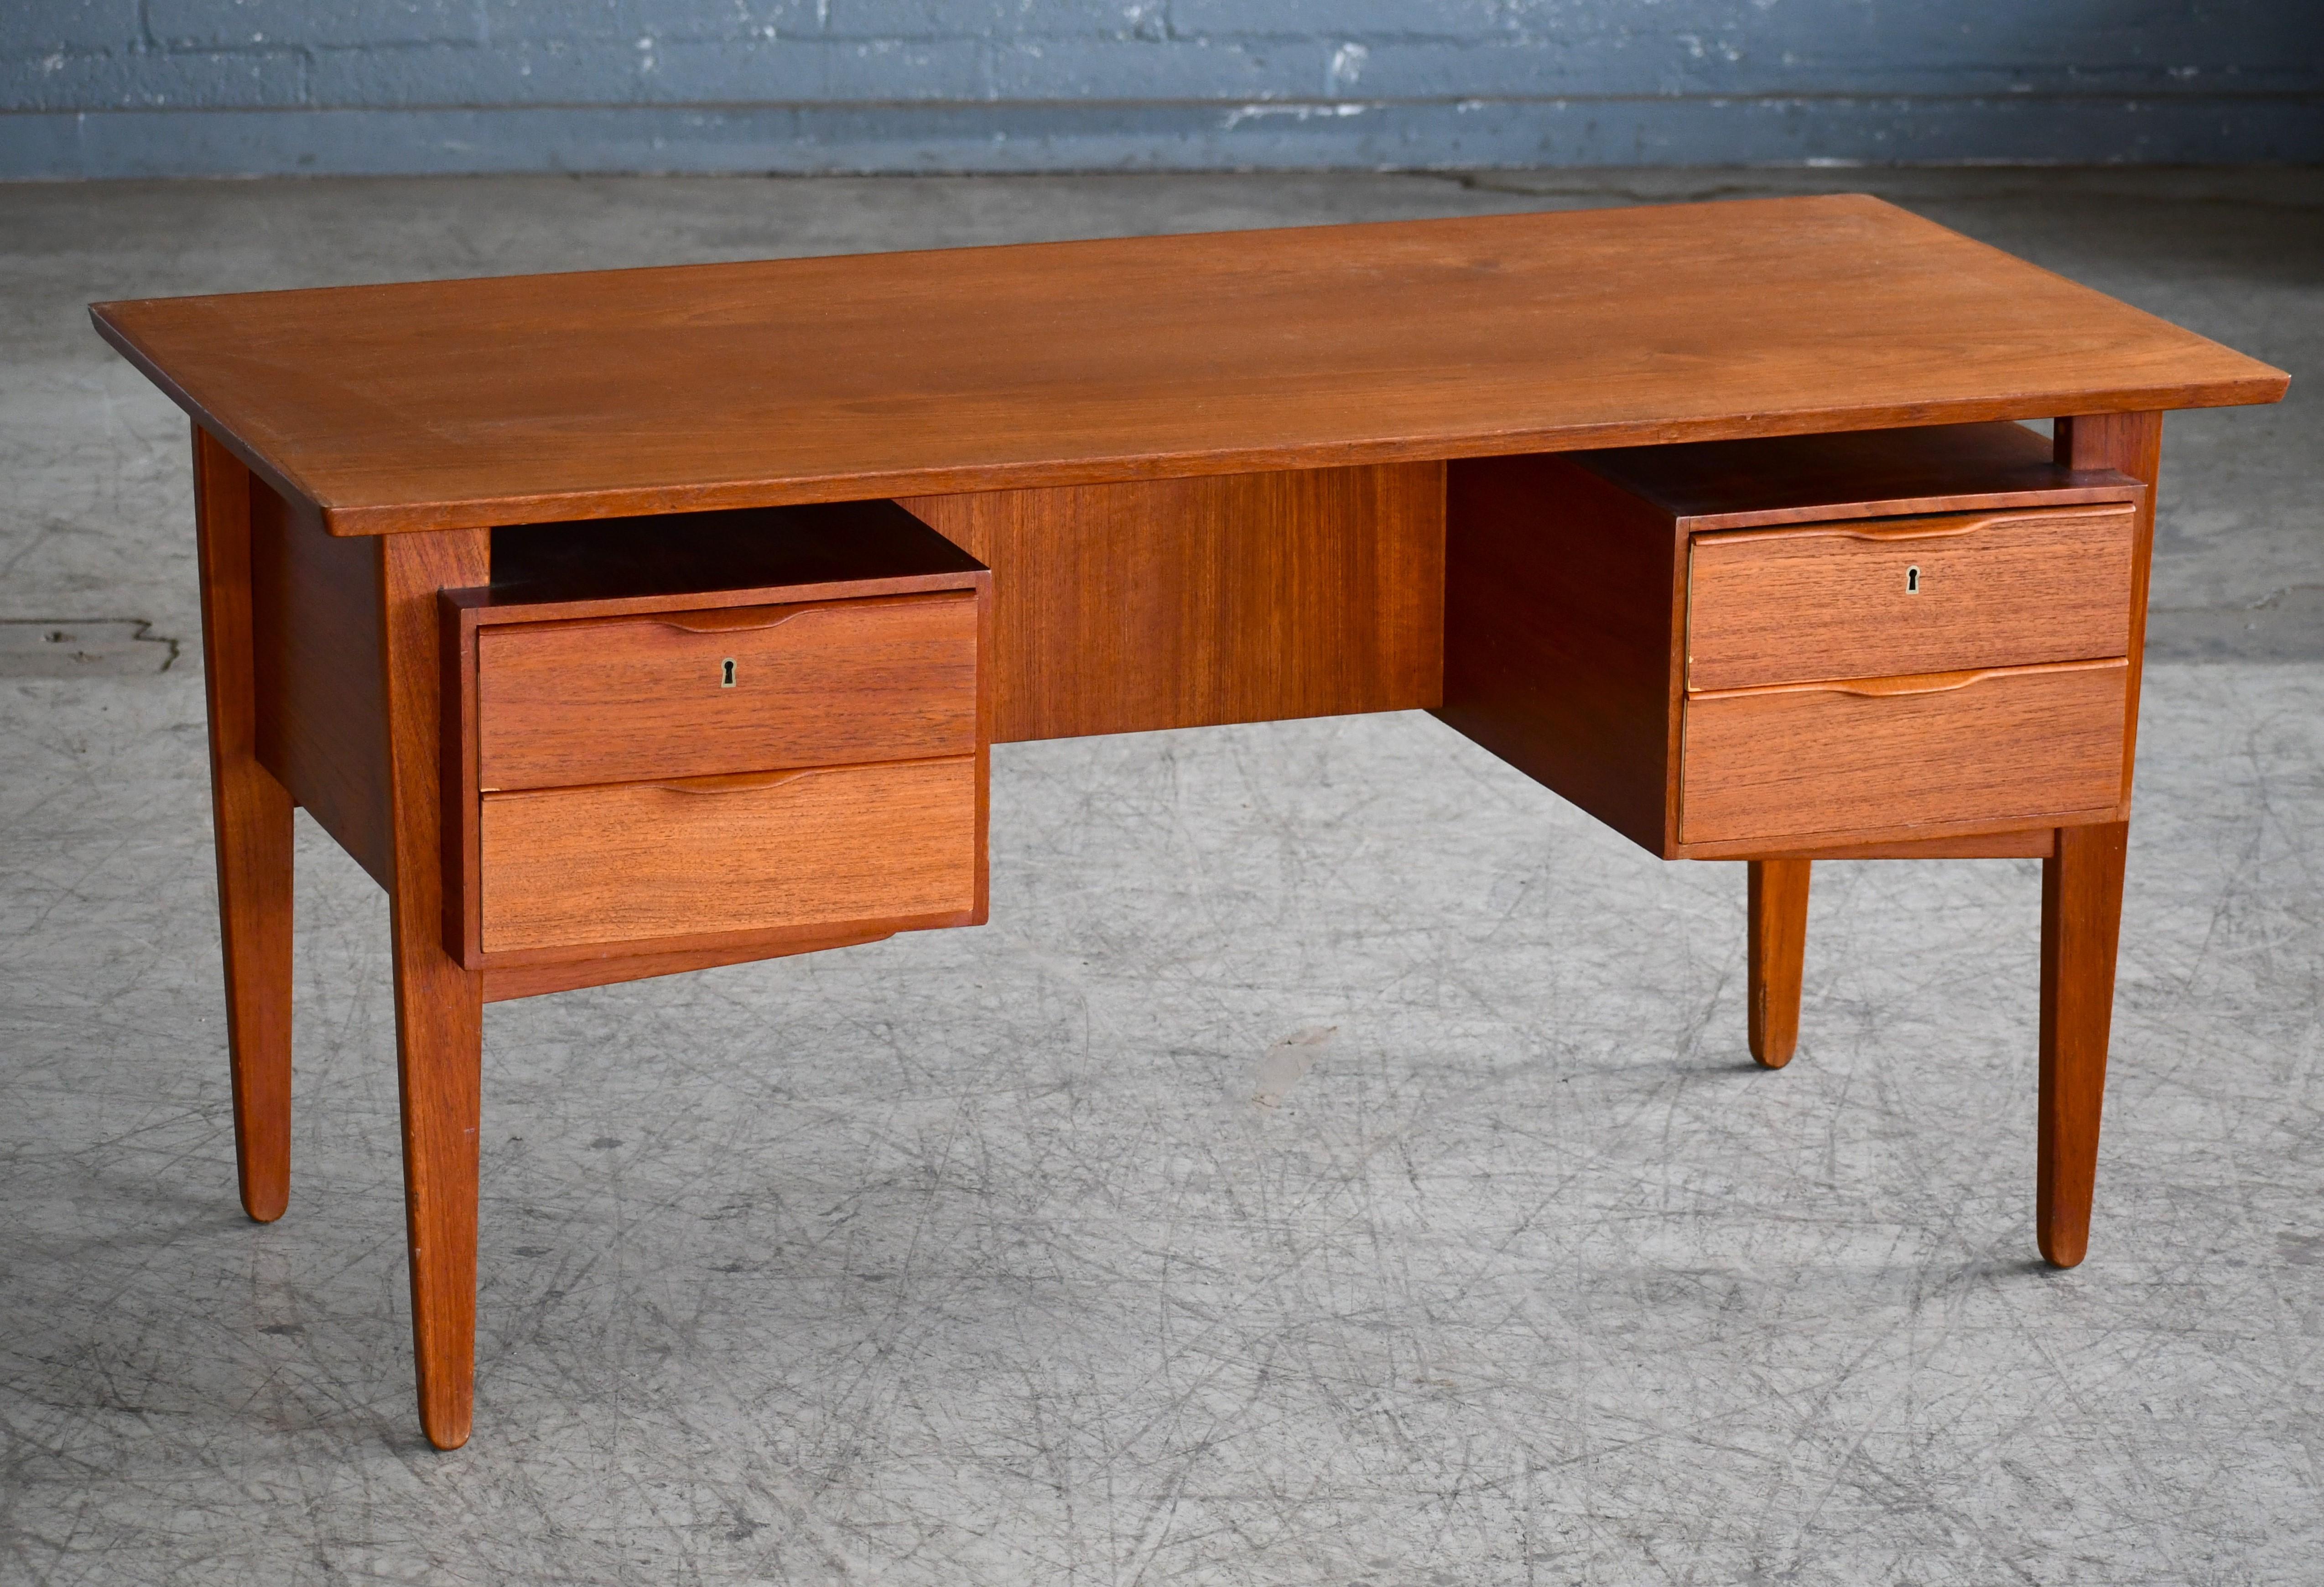 Very beautiful designed executive desks In the style of Gunni Omann's Model 75 and Kai Kristiansen's Model 60. Classic Made of solid and veneered teak. The desk features a desk top that floats over the base. The base has three drawers on either side